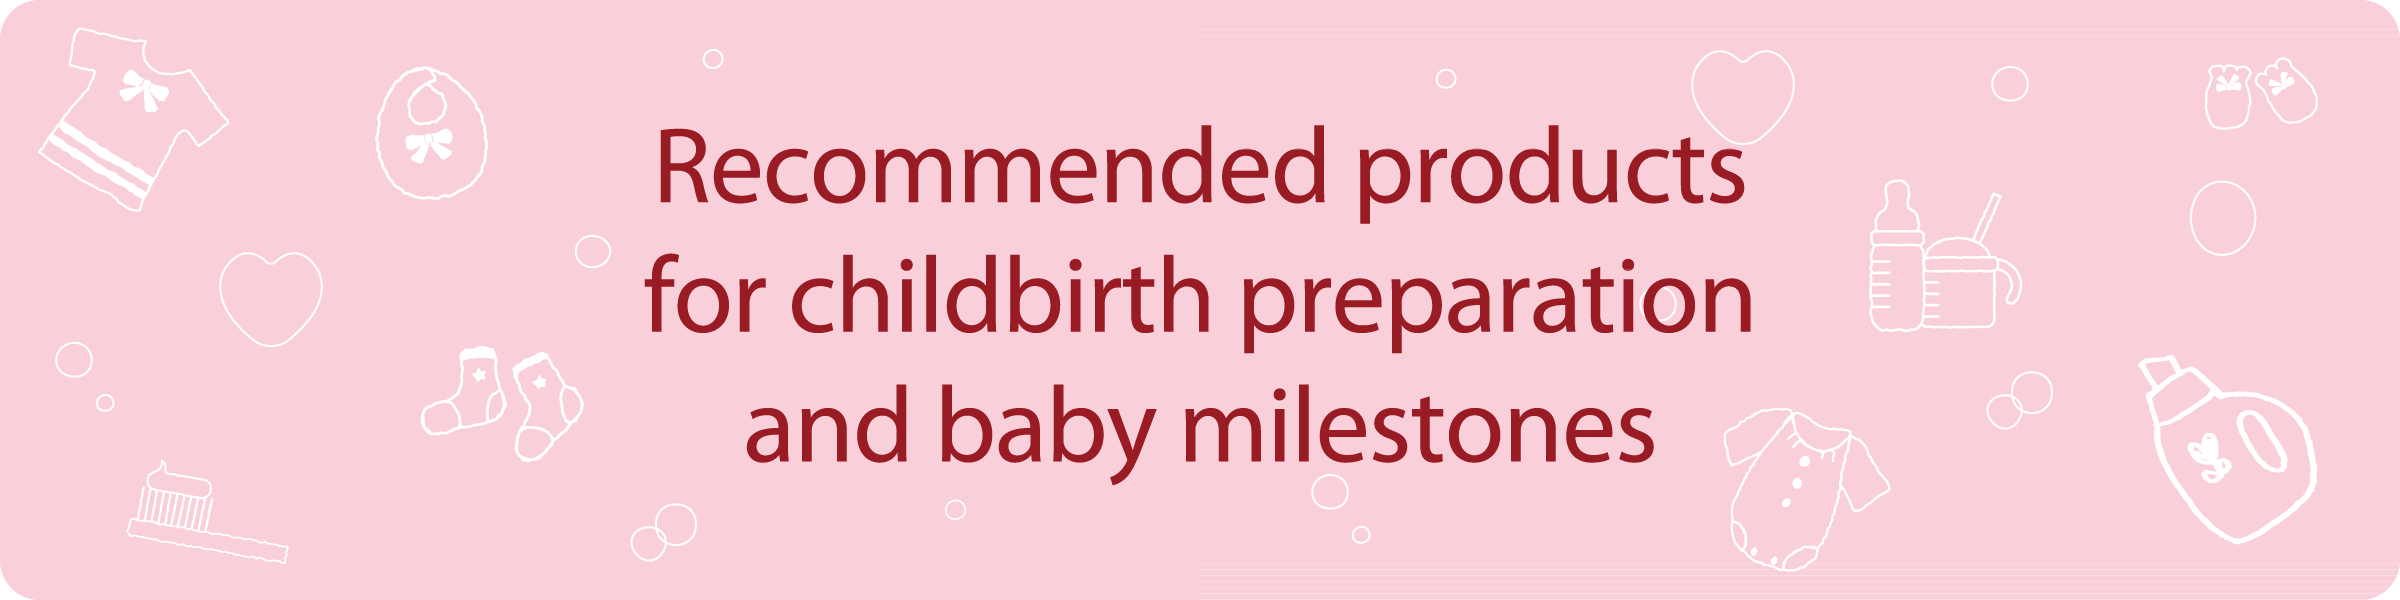 Recommended products for childbirth preparation and baby milestones